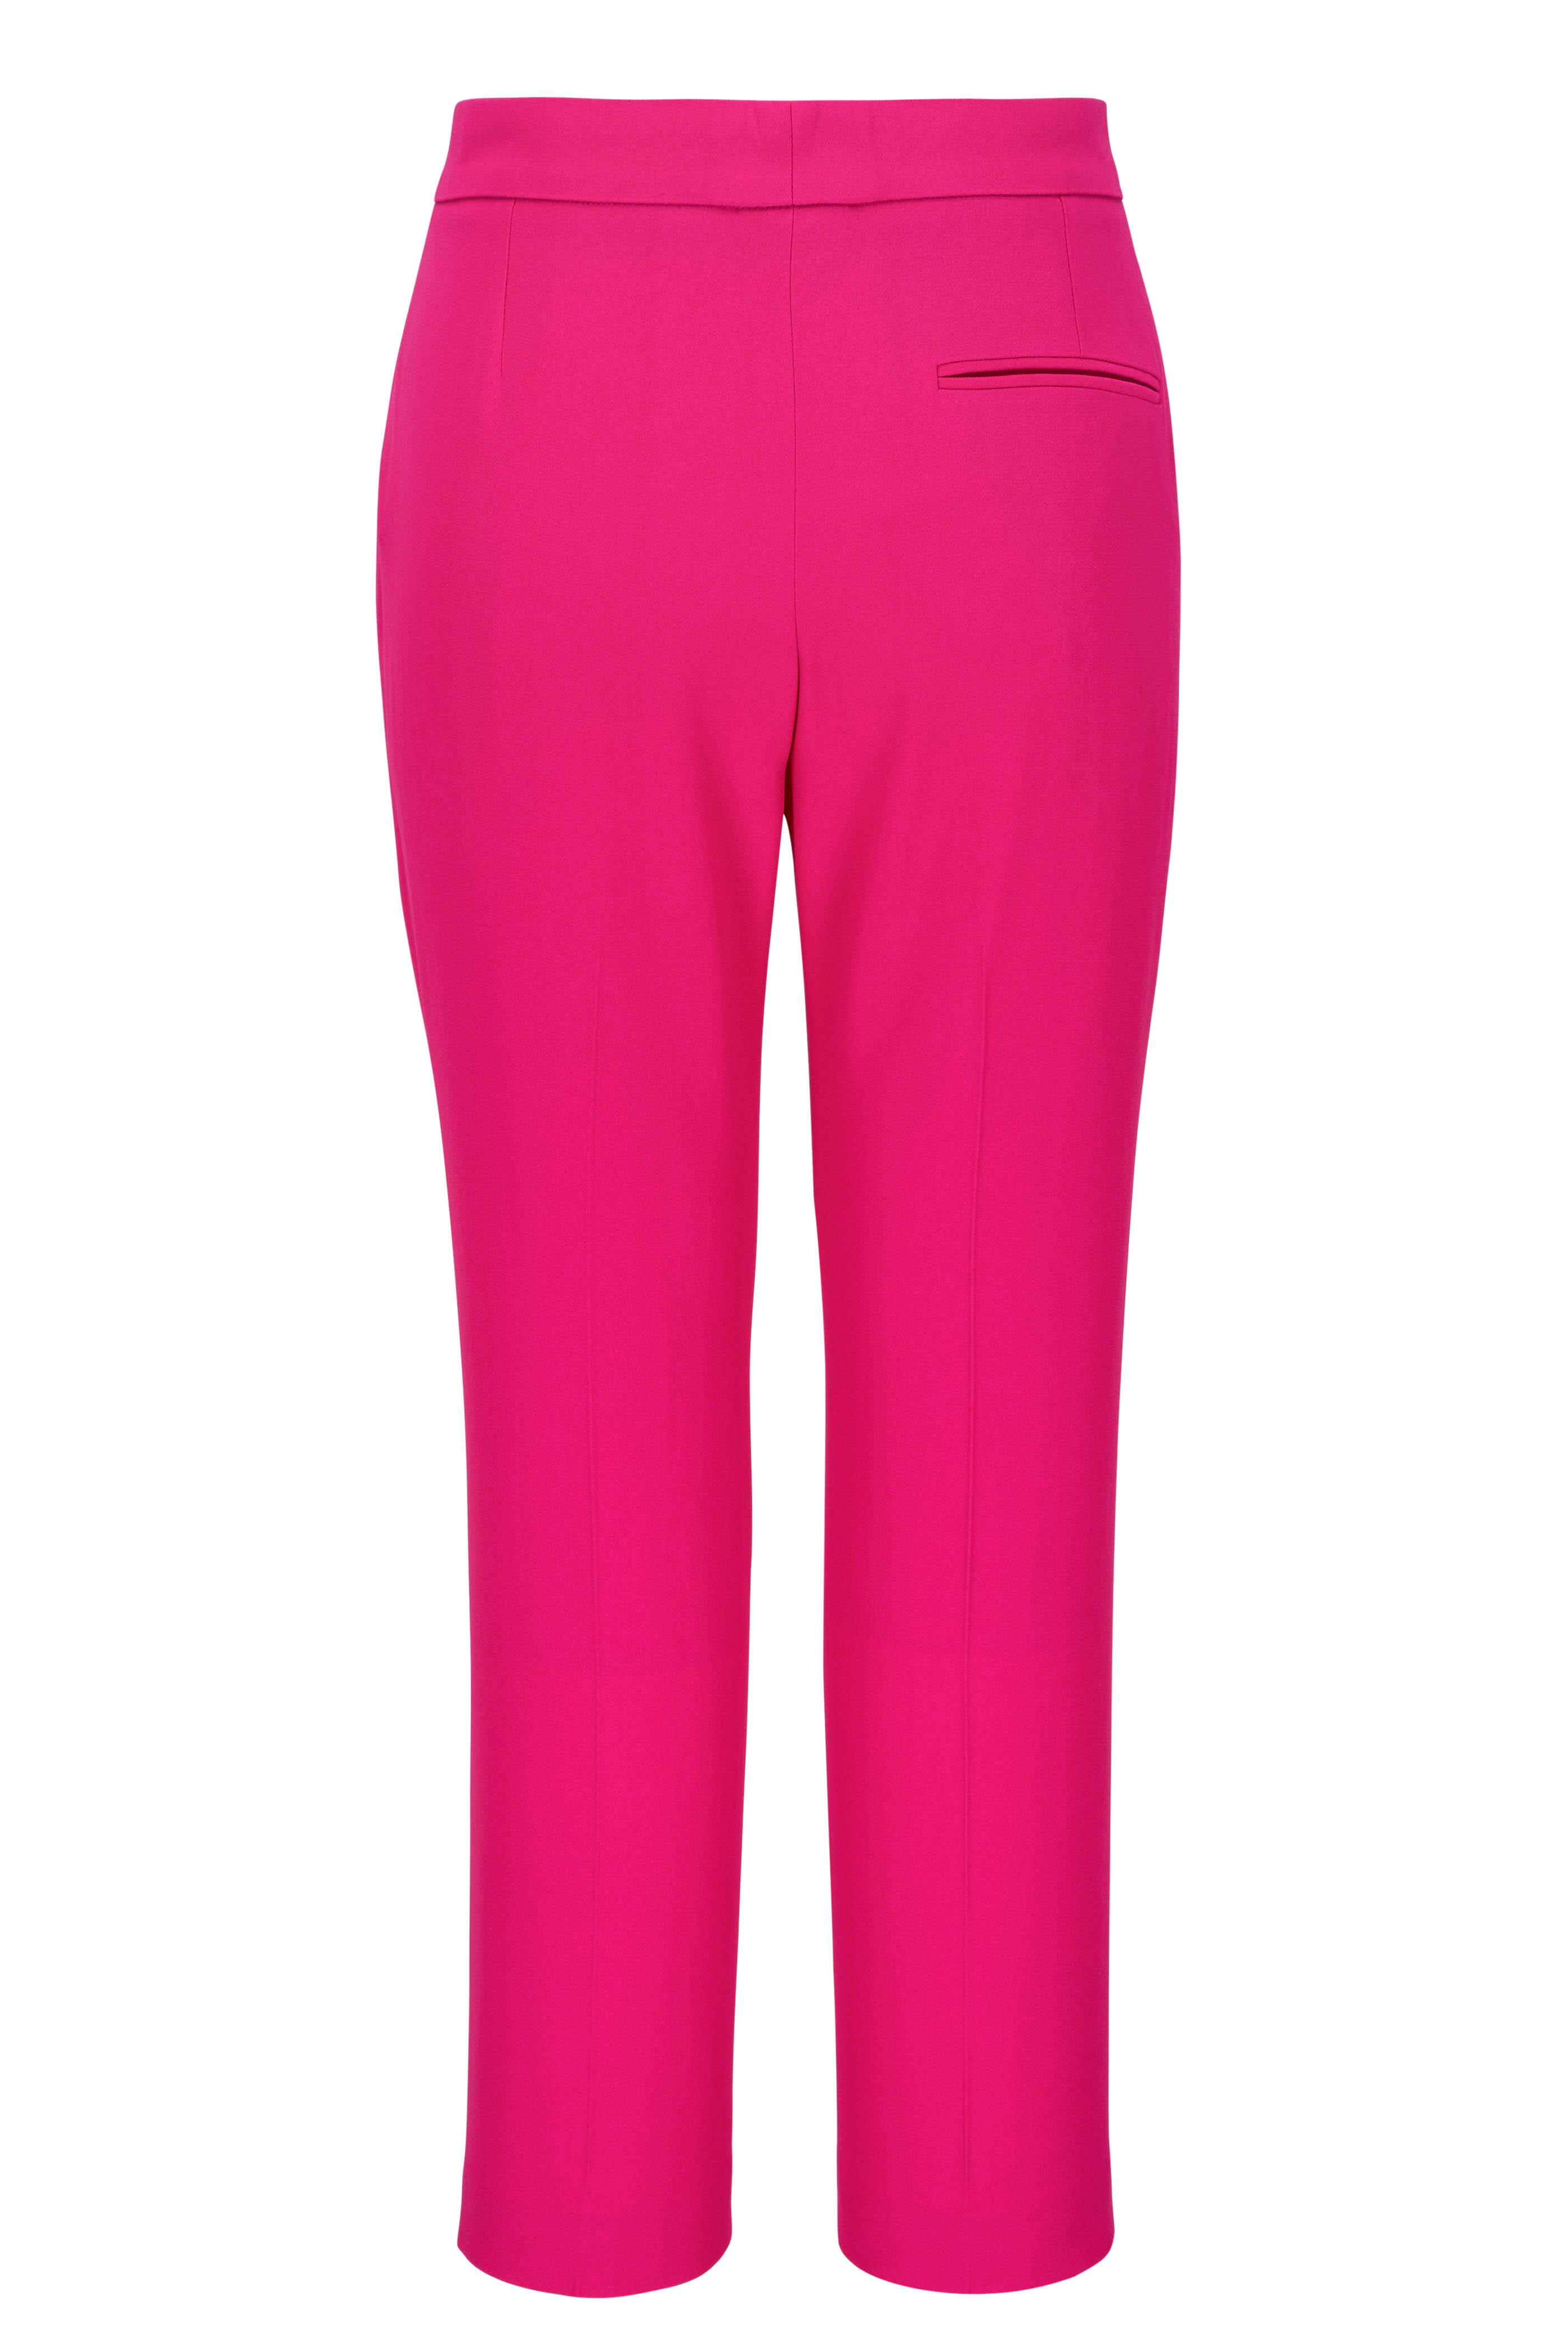 Alexander McQueen - Orchid Pink Leaf Crepe Cropped Dress Pant